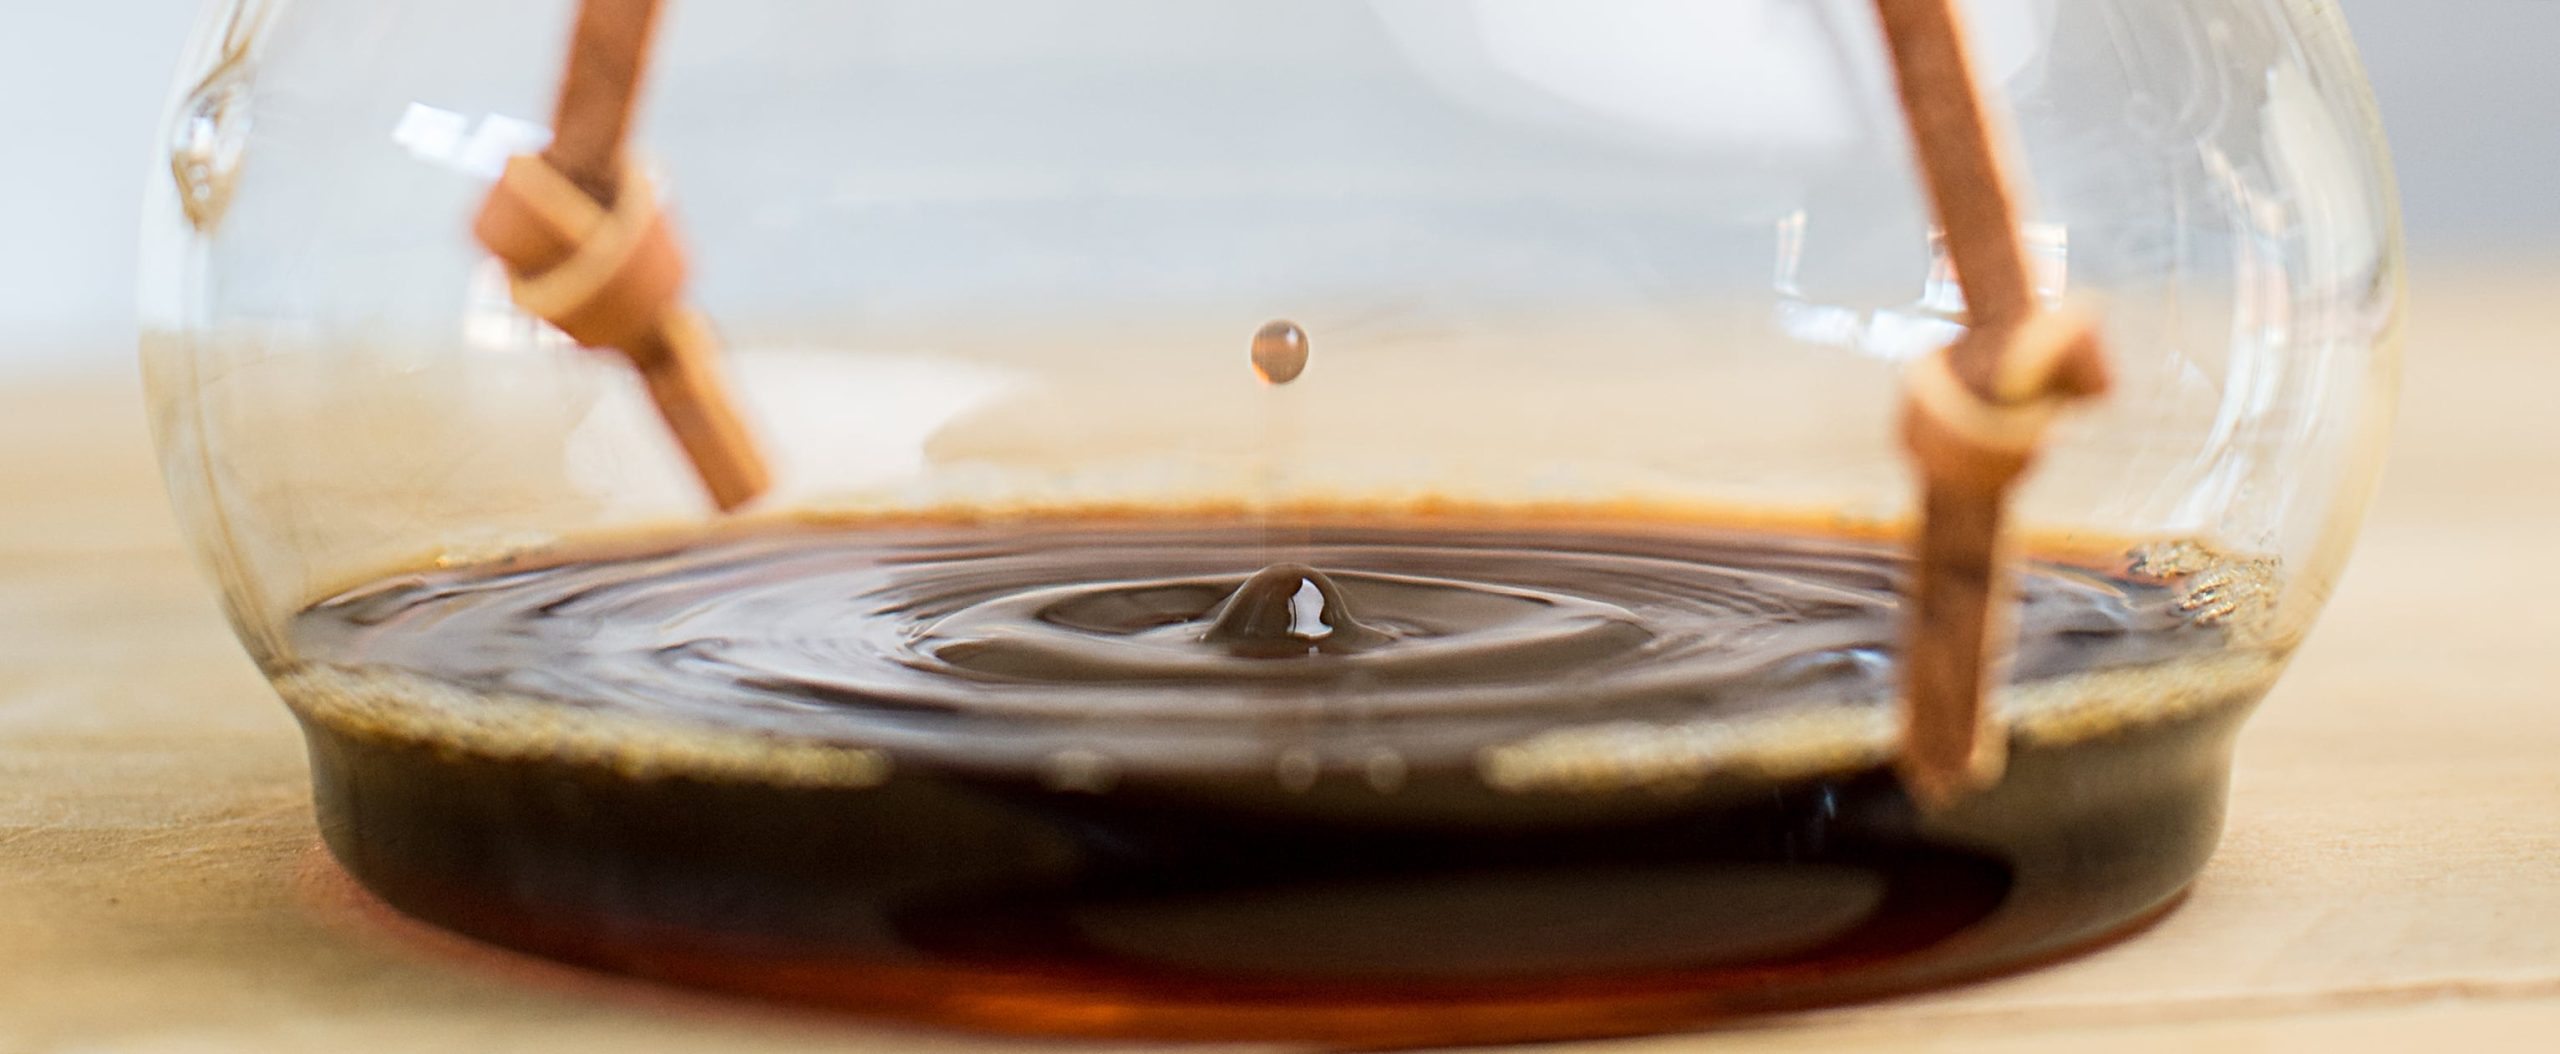 coffee dripping into a Chemex filter coffee maker